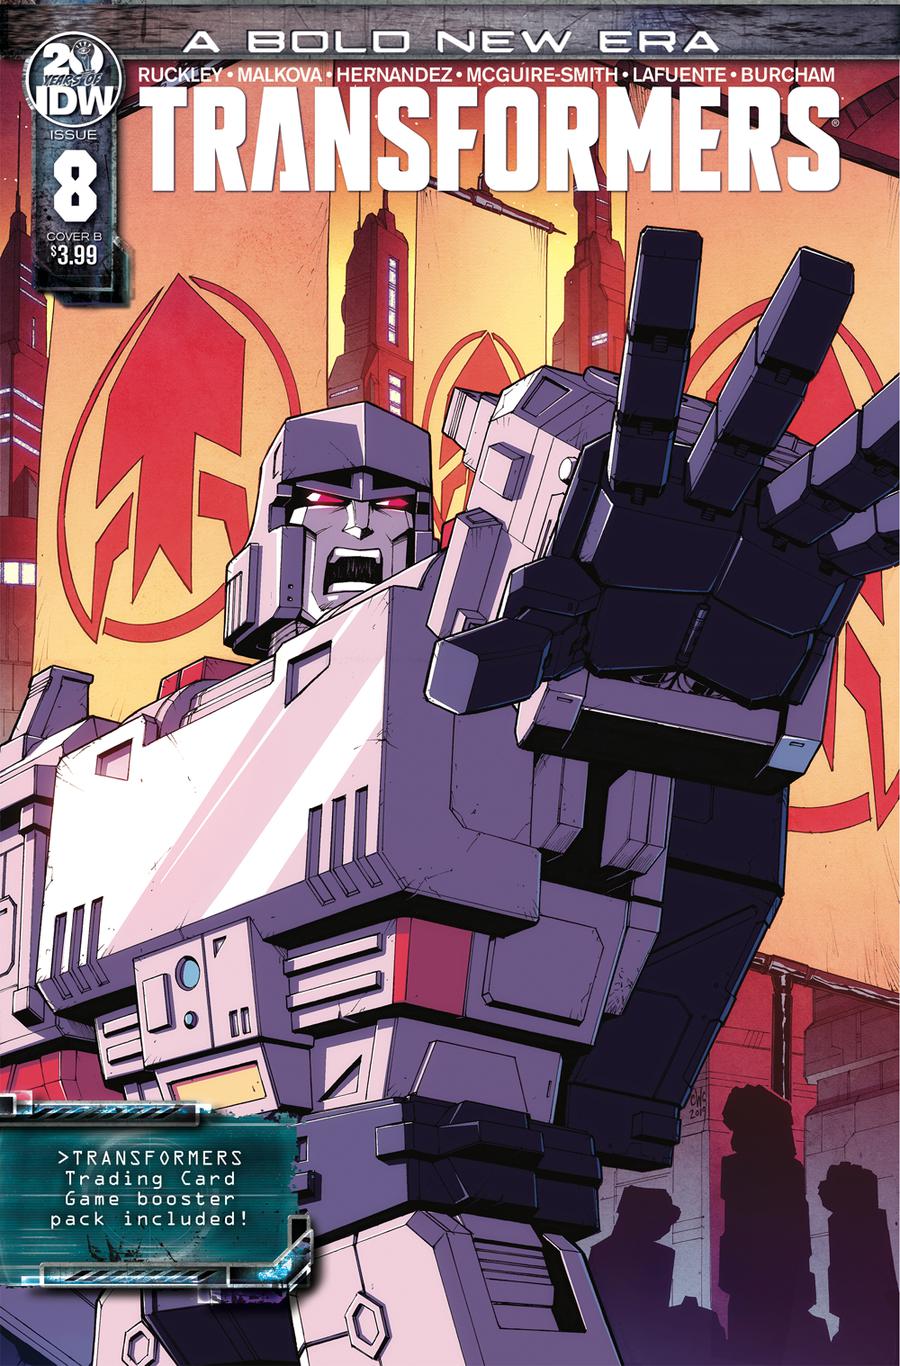 Transformers Vol 4 #8 Cover B Variant Casey Coller Cover